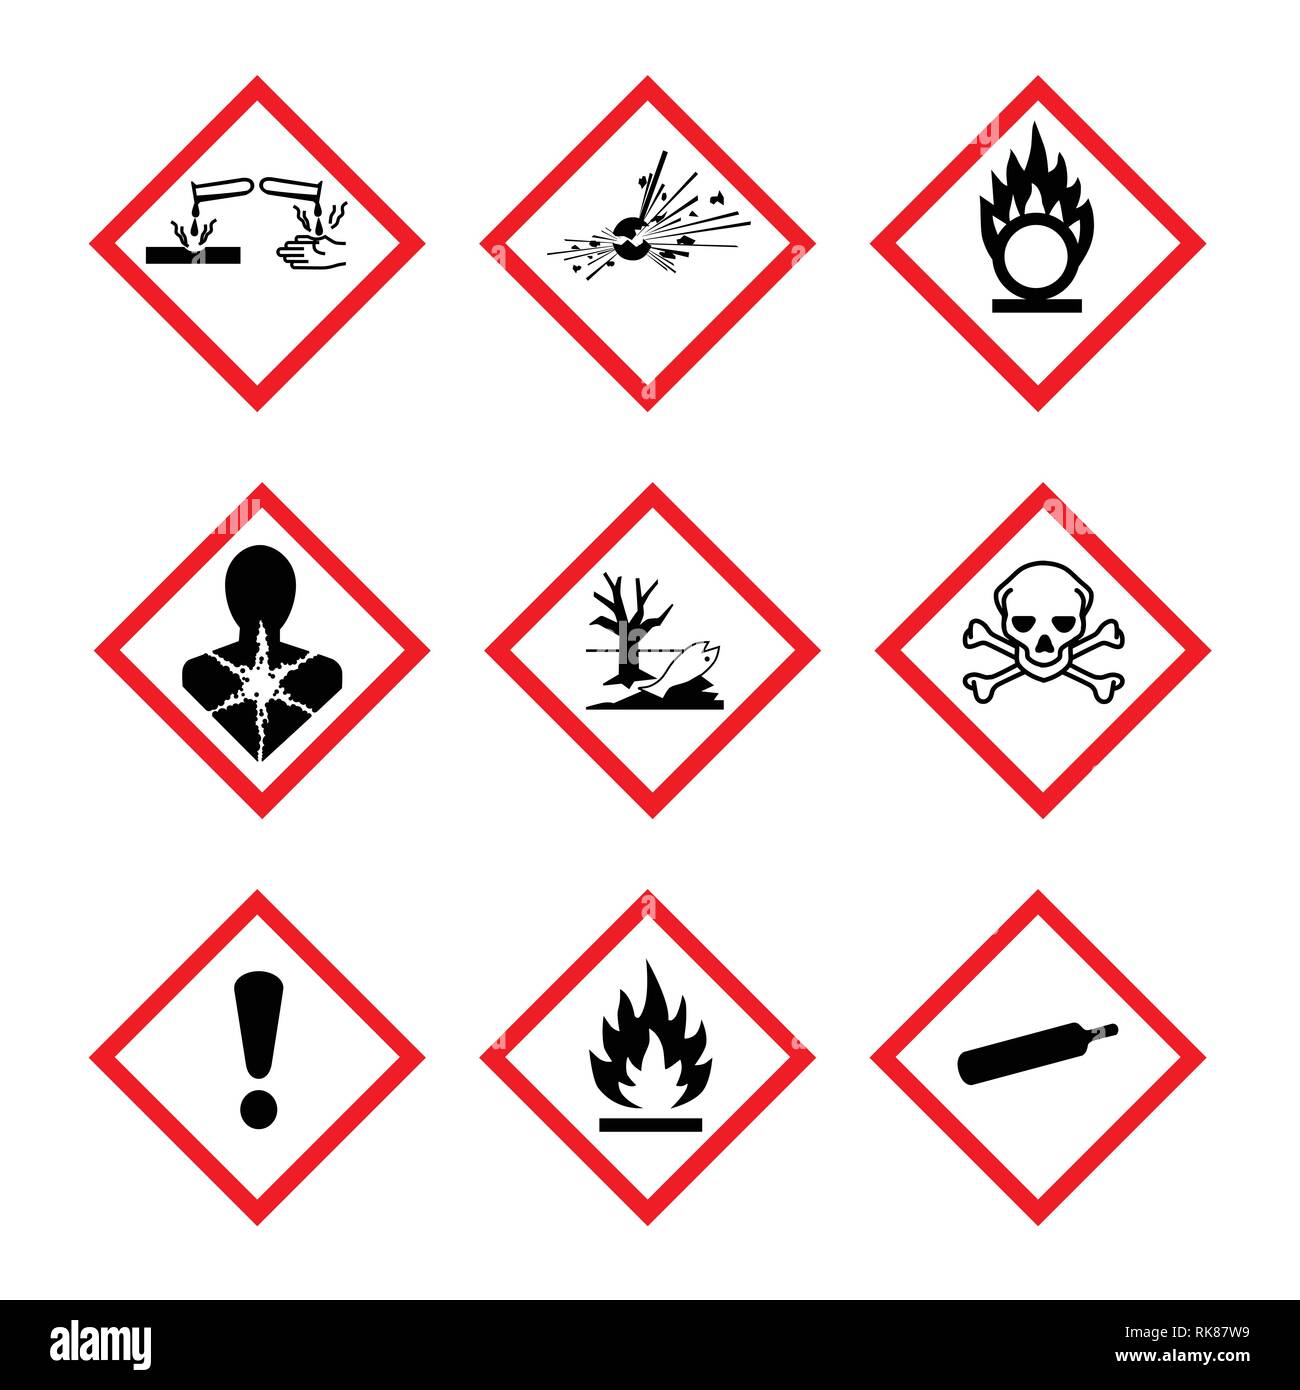 Vector illustration GHS pictogram hazard sign set, set icons isolated on white background. Dangerous, hazard symbol collections Stock Vector